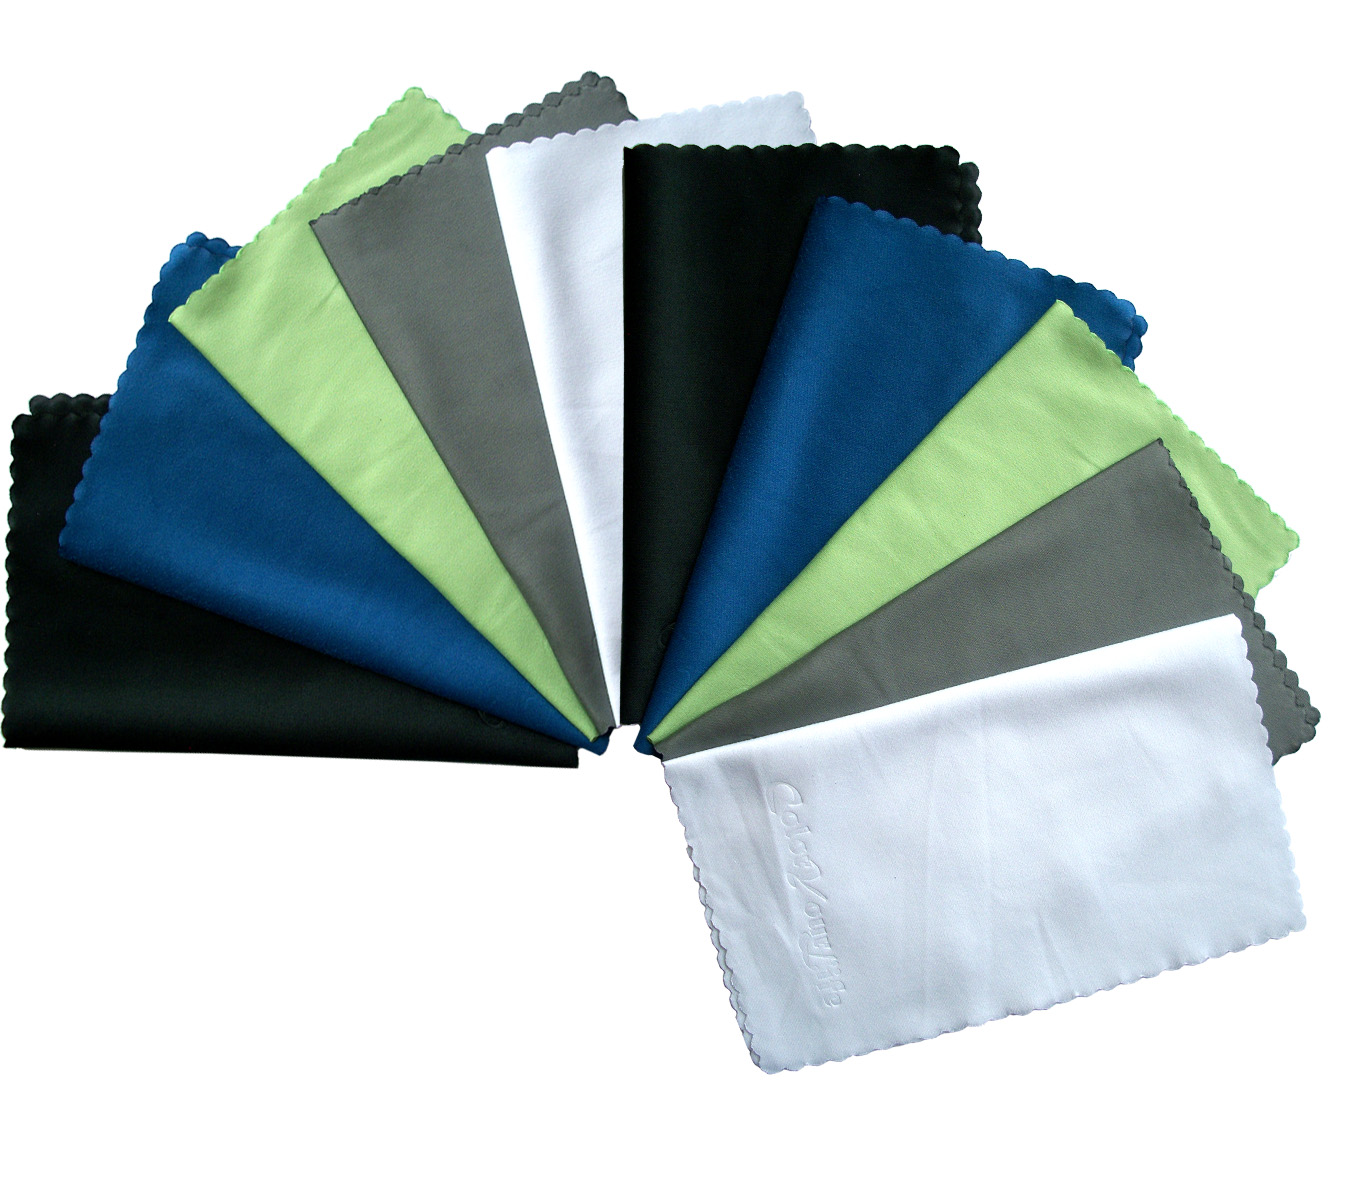 Microfiber Cleaning Cloths (7 inch x 6 inch) – Eco-friendly and smart